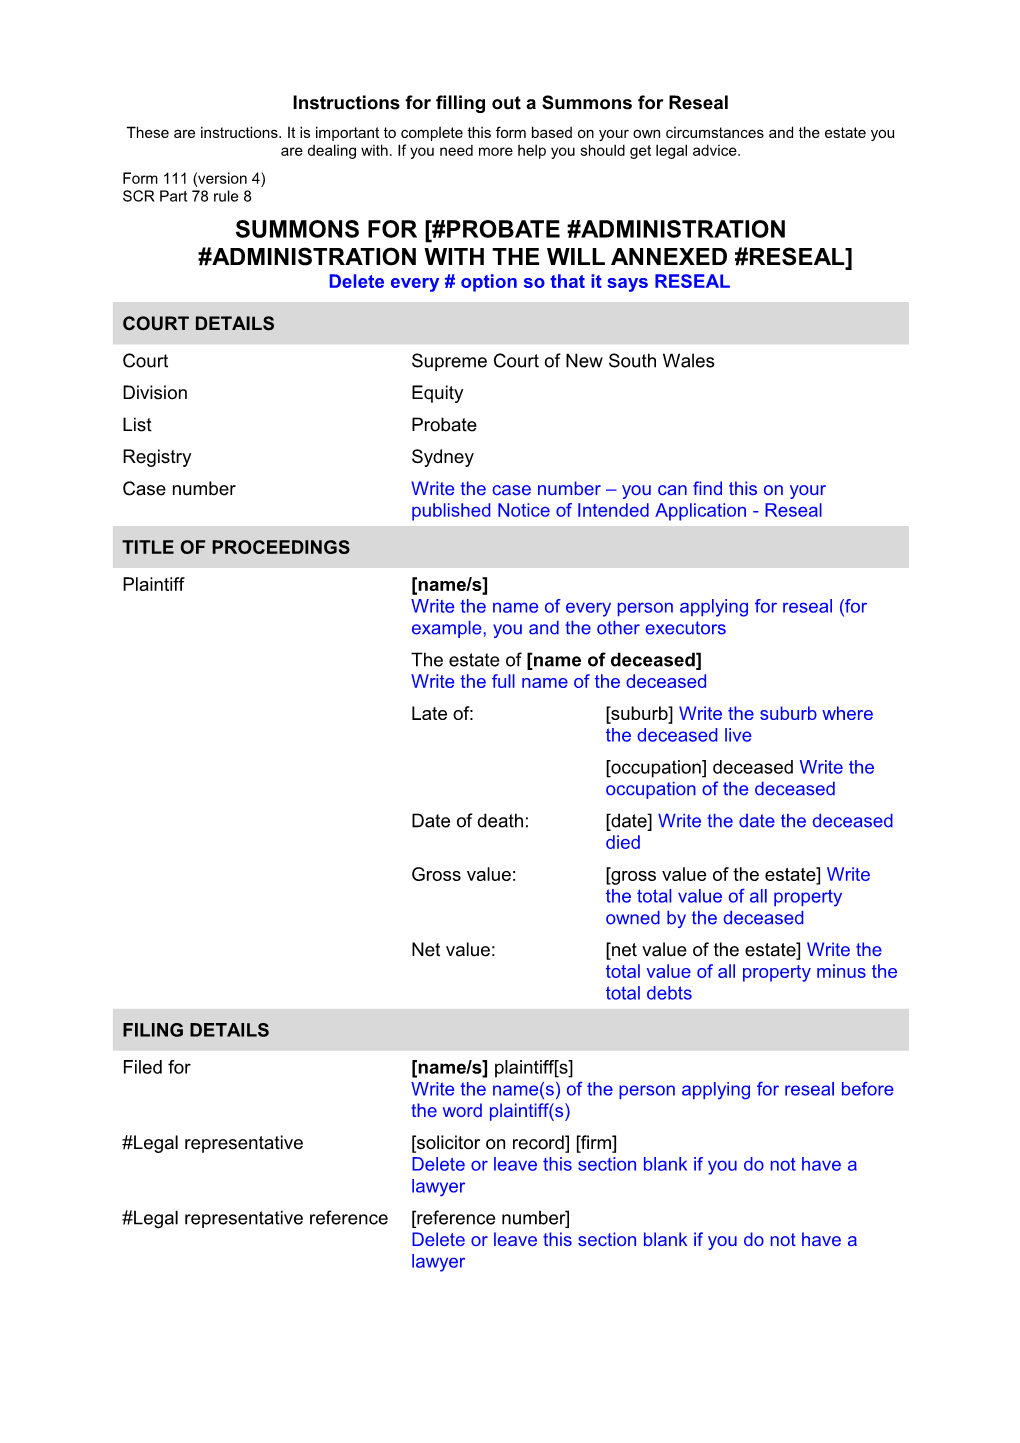 NSW UCPR - Form 111 (Version 2) - Summons for Probate, Administration Or Resealing